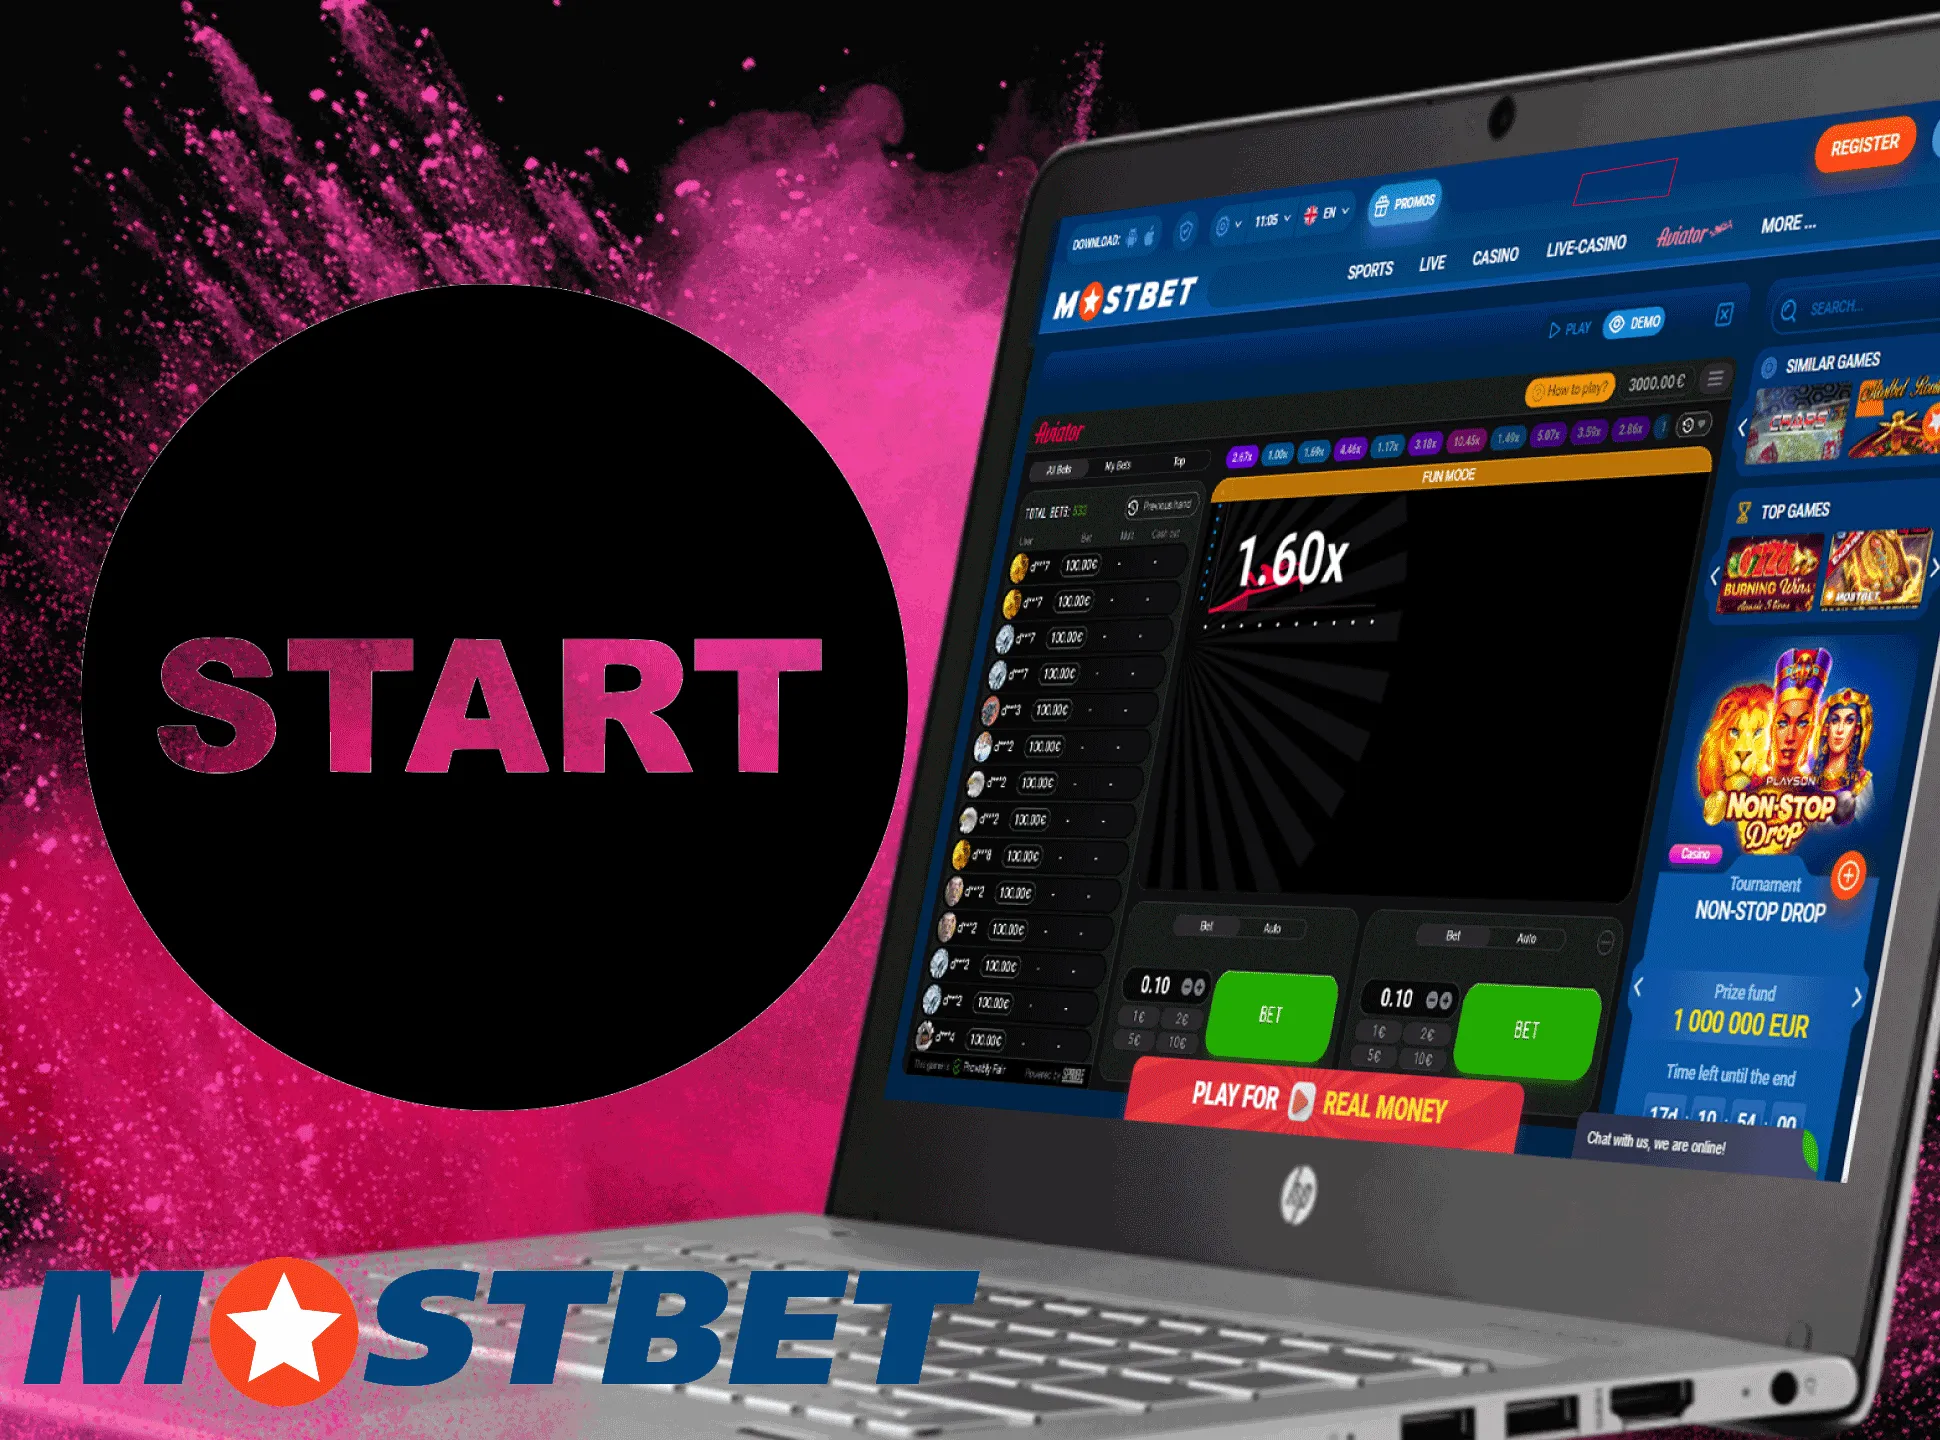 Visit the Mostbet official website.